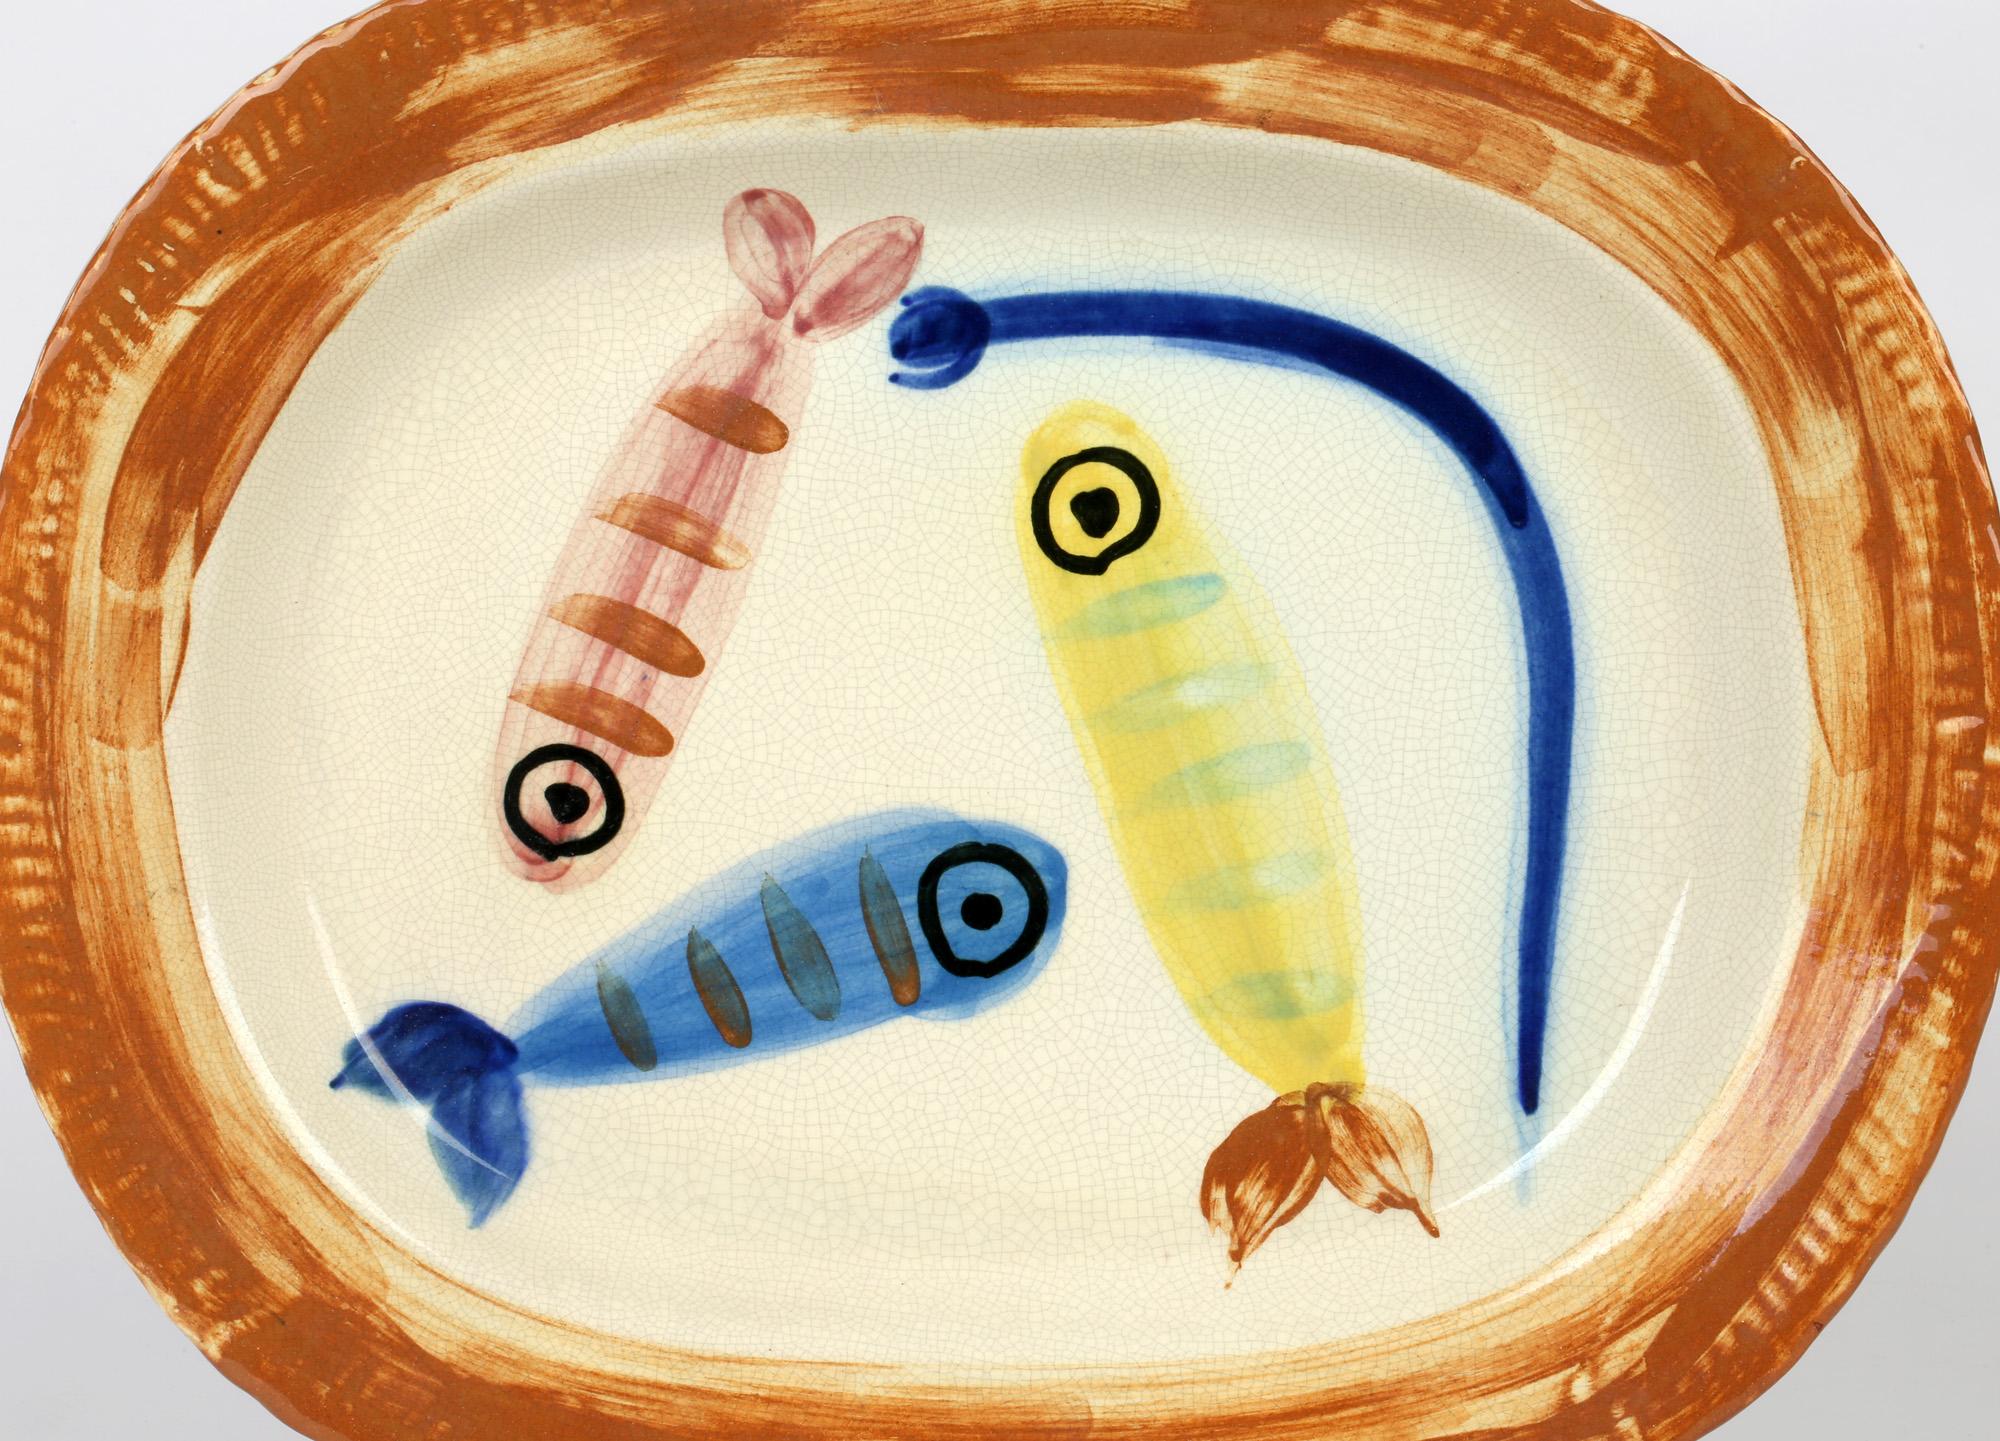 A French Terre de faience dish hand decorated with the Quatre Poissons Polychromes (Four Polychrome Fishes) design by Pablo Picasso and created in 1947. The oval shaped dish is made in a white earthenware clay and hand decorated with four fish in